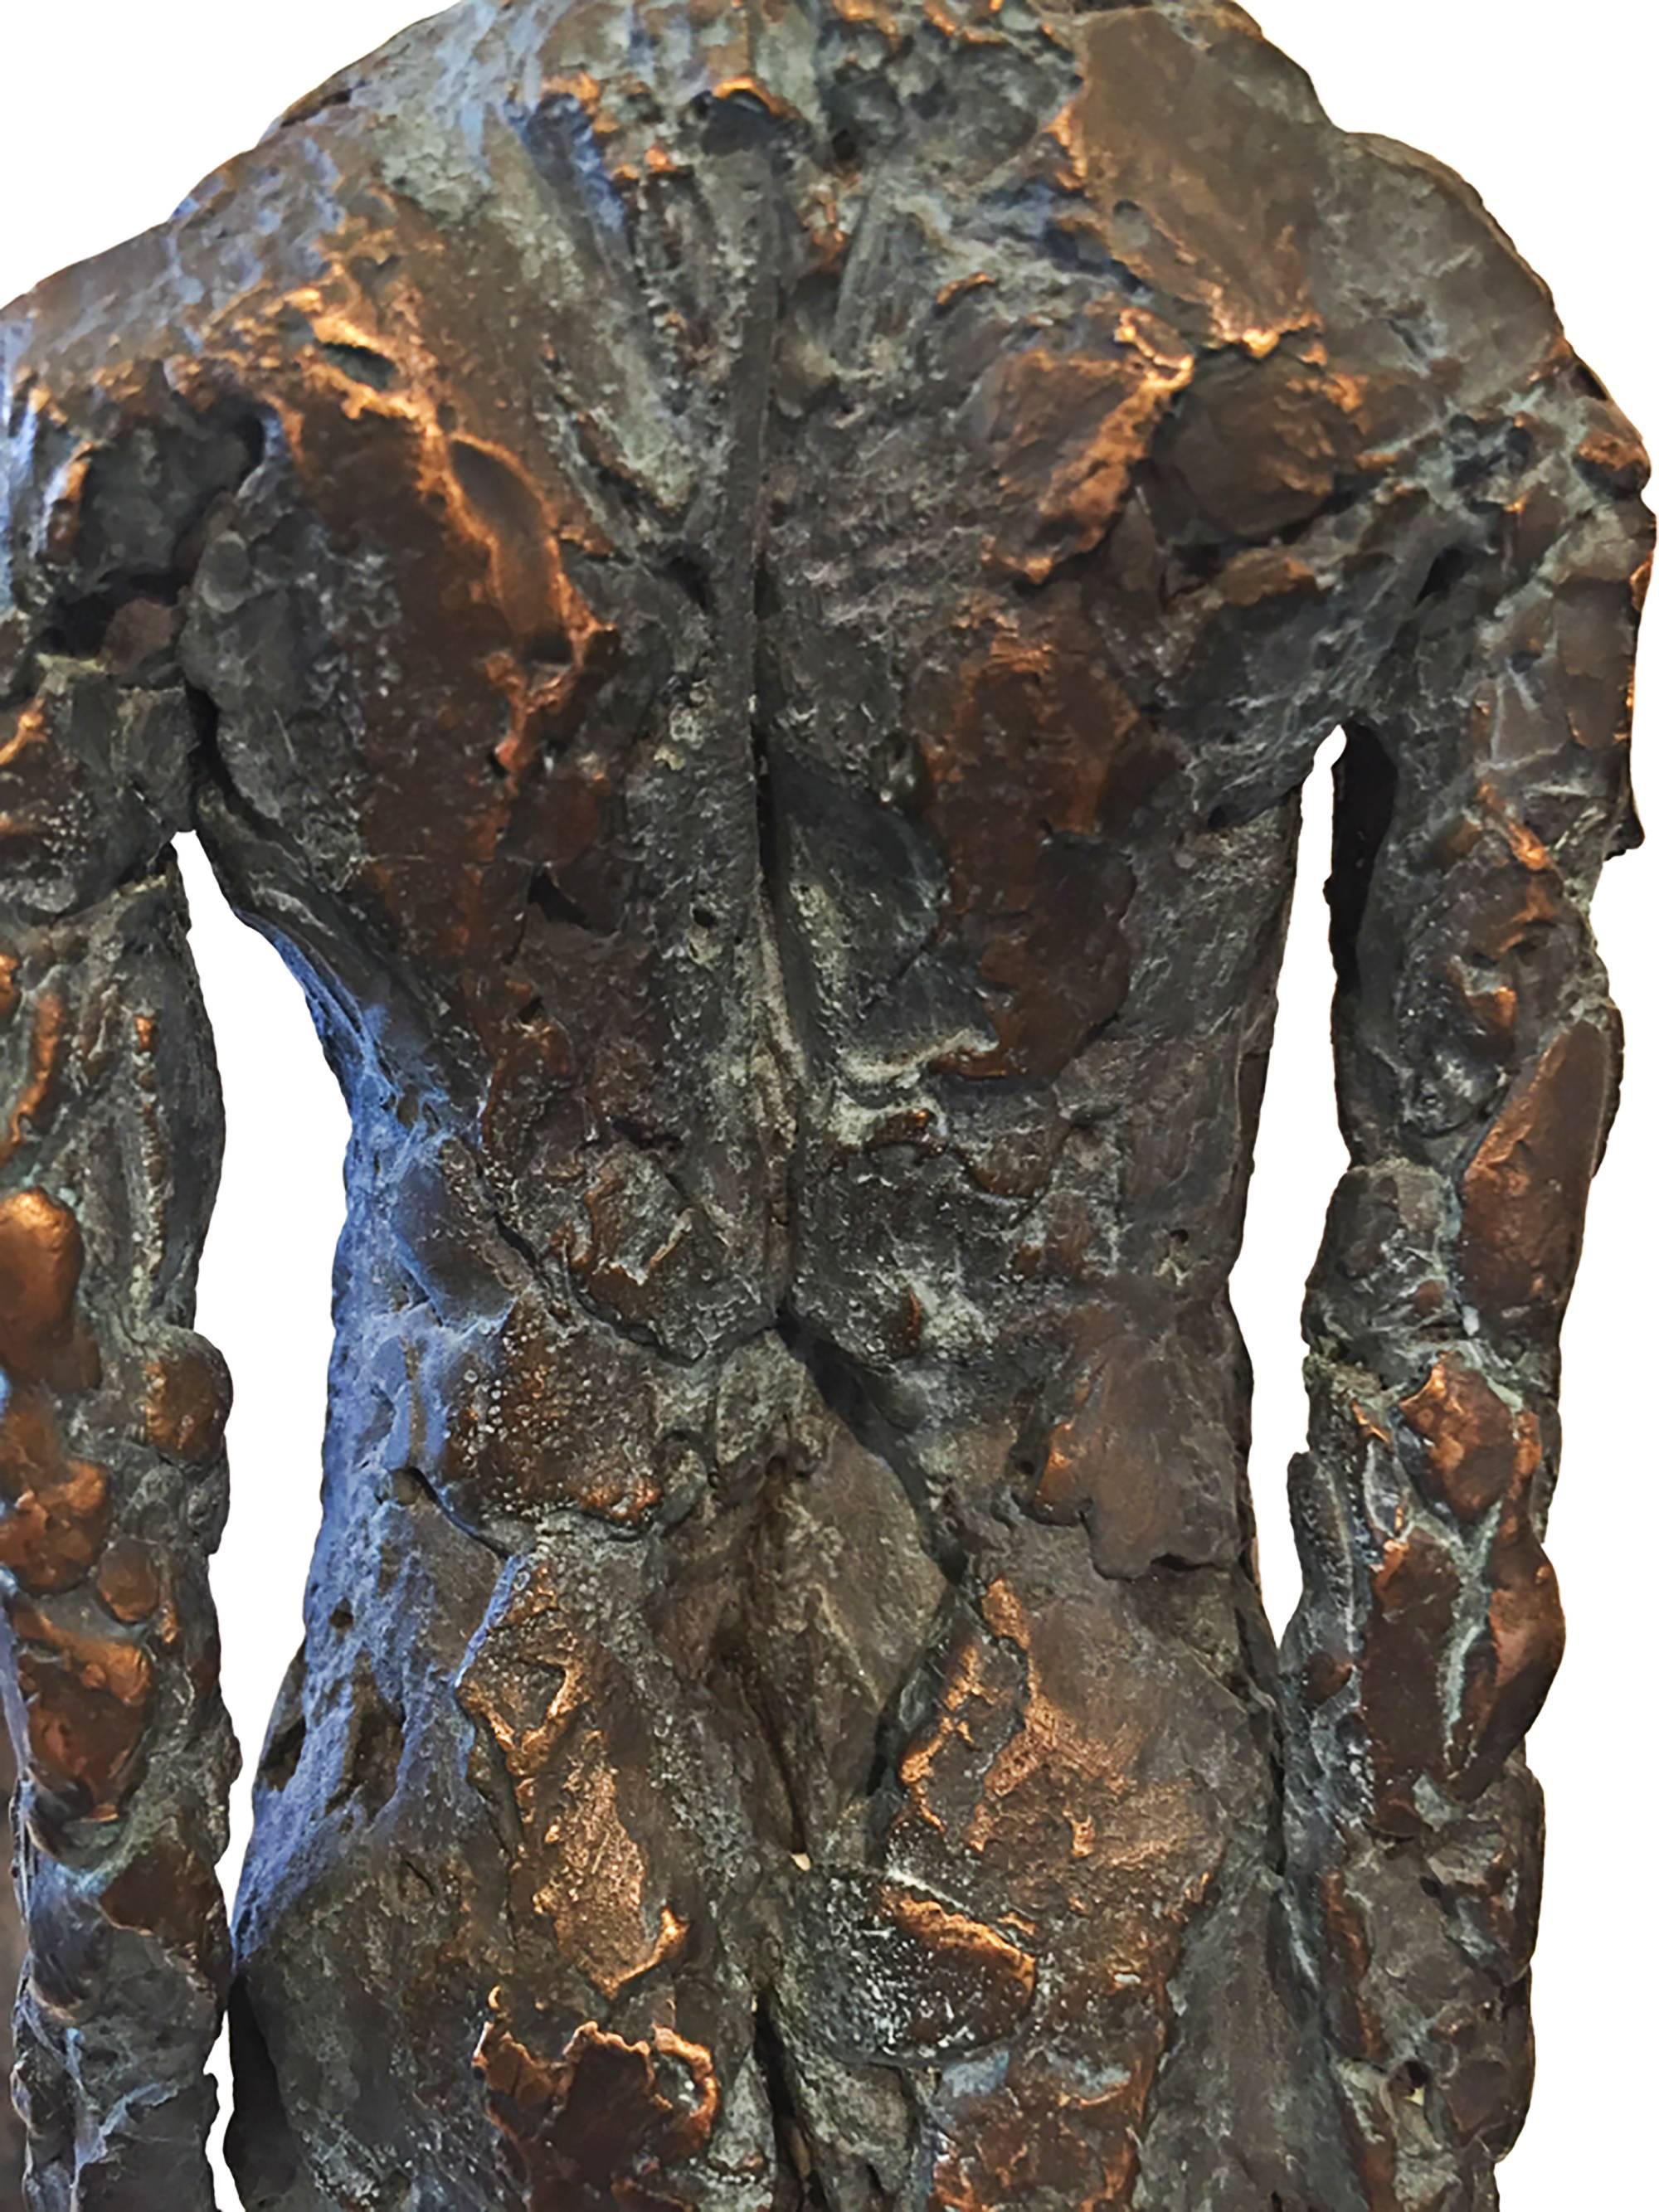 From the Muse Series: Dream, Ponder, and Meditate; Edition of 9

Sharon Loper creates transitory sculptures out bronze, stone, or wood and views her work as landscapes of thought based on organic principles. 

As a classically educated